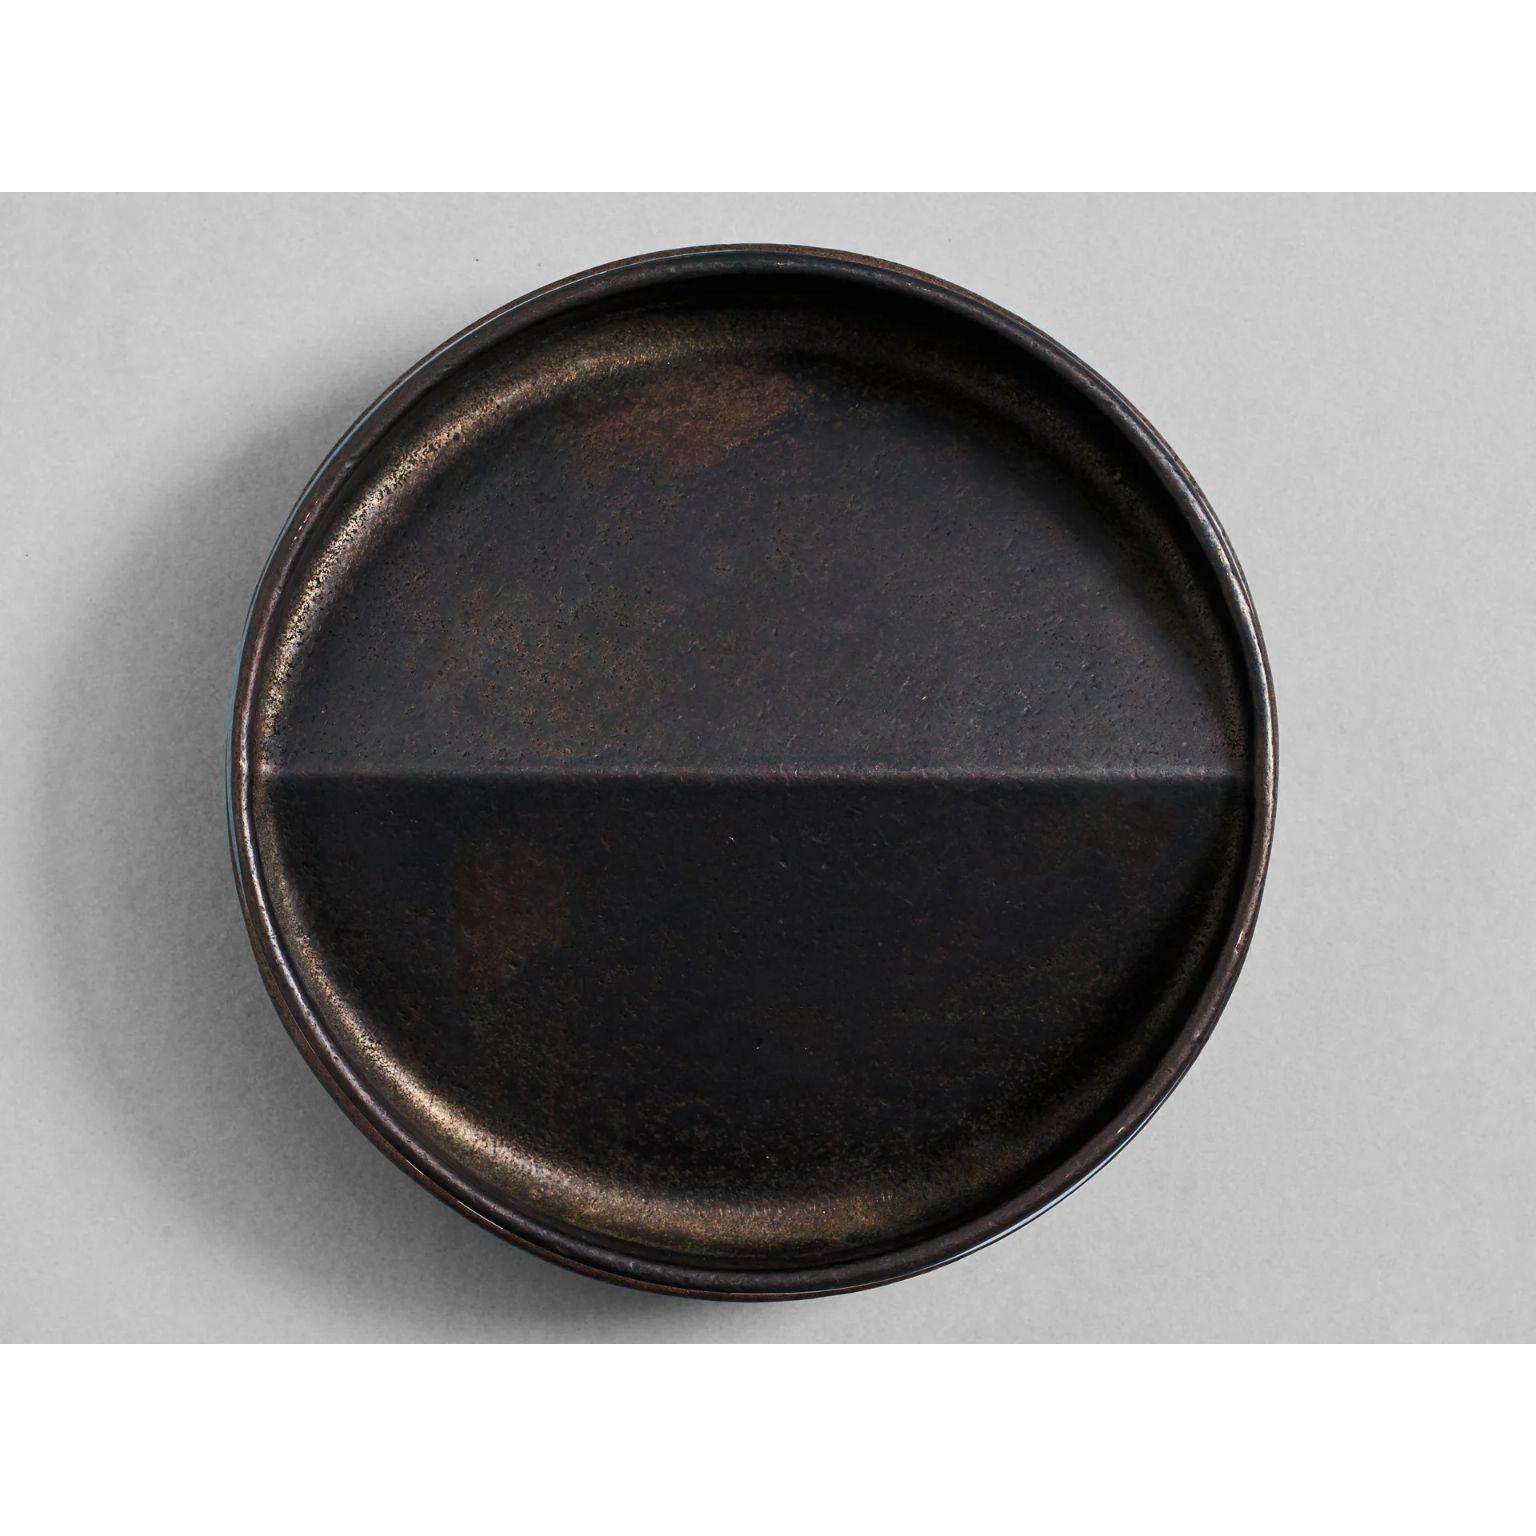 Blackened Vide Poche Rond XL by Henry Wilson
Dimensions: D 18 x H 4 cm
Materials: Bronze

Discard your day at the door.
Your Vide Poche XL is designed with your loose-pocket items in mind – think keys, change and phone. It is made, polished and